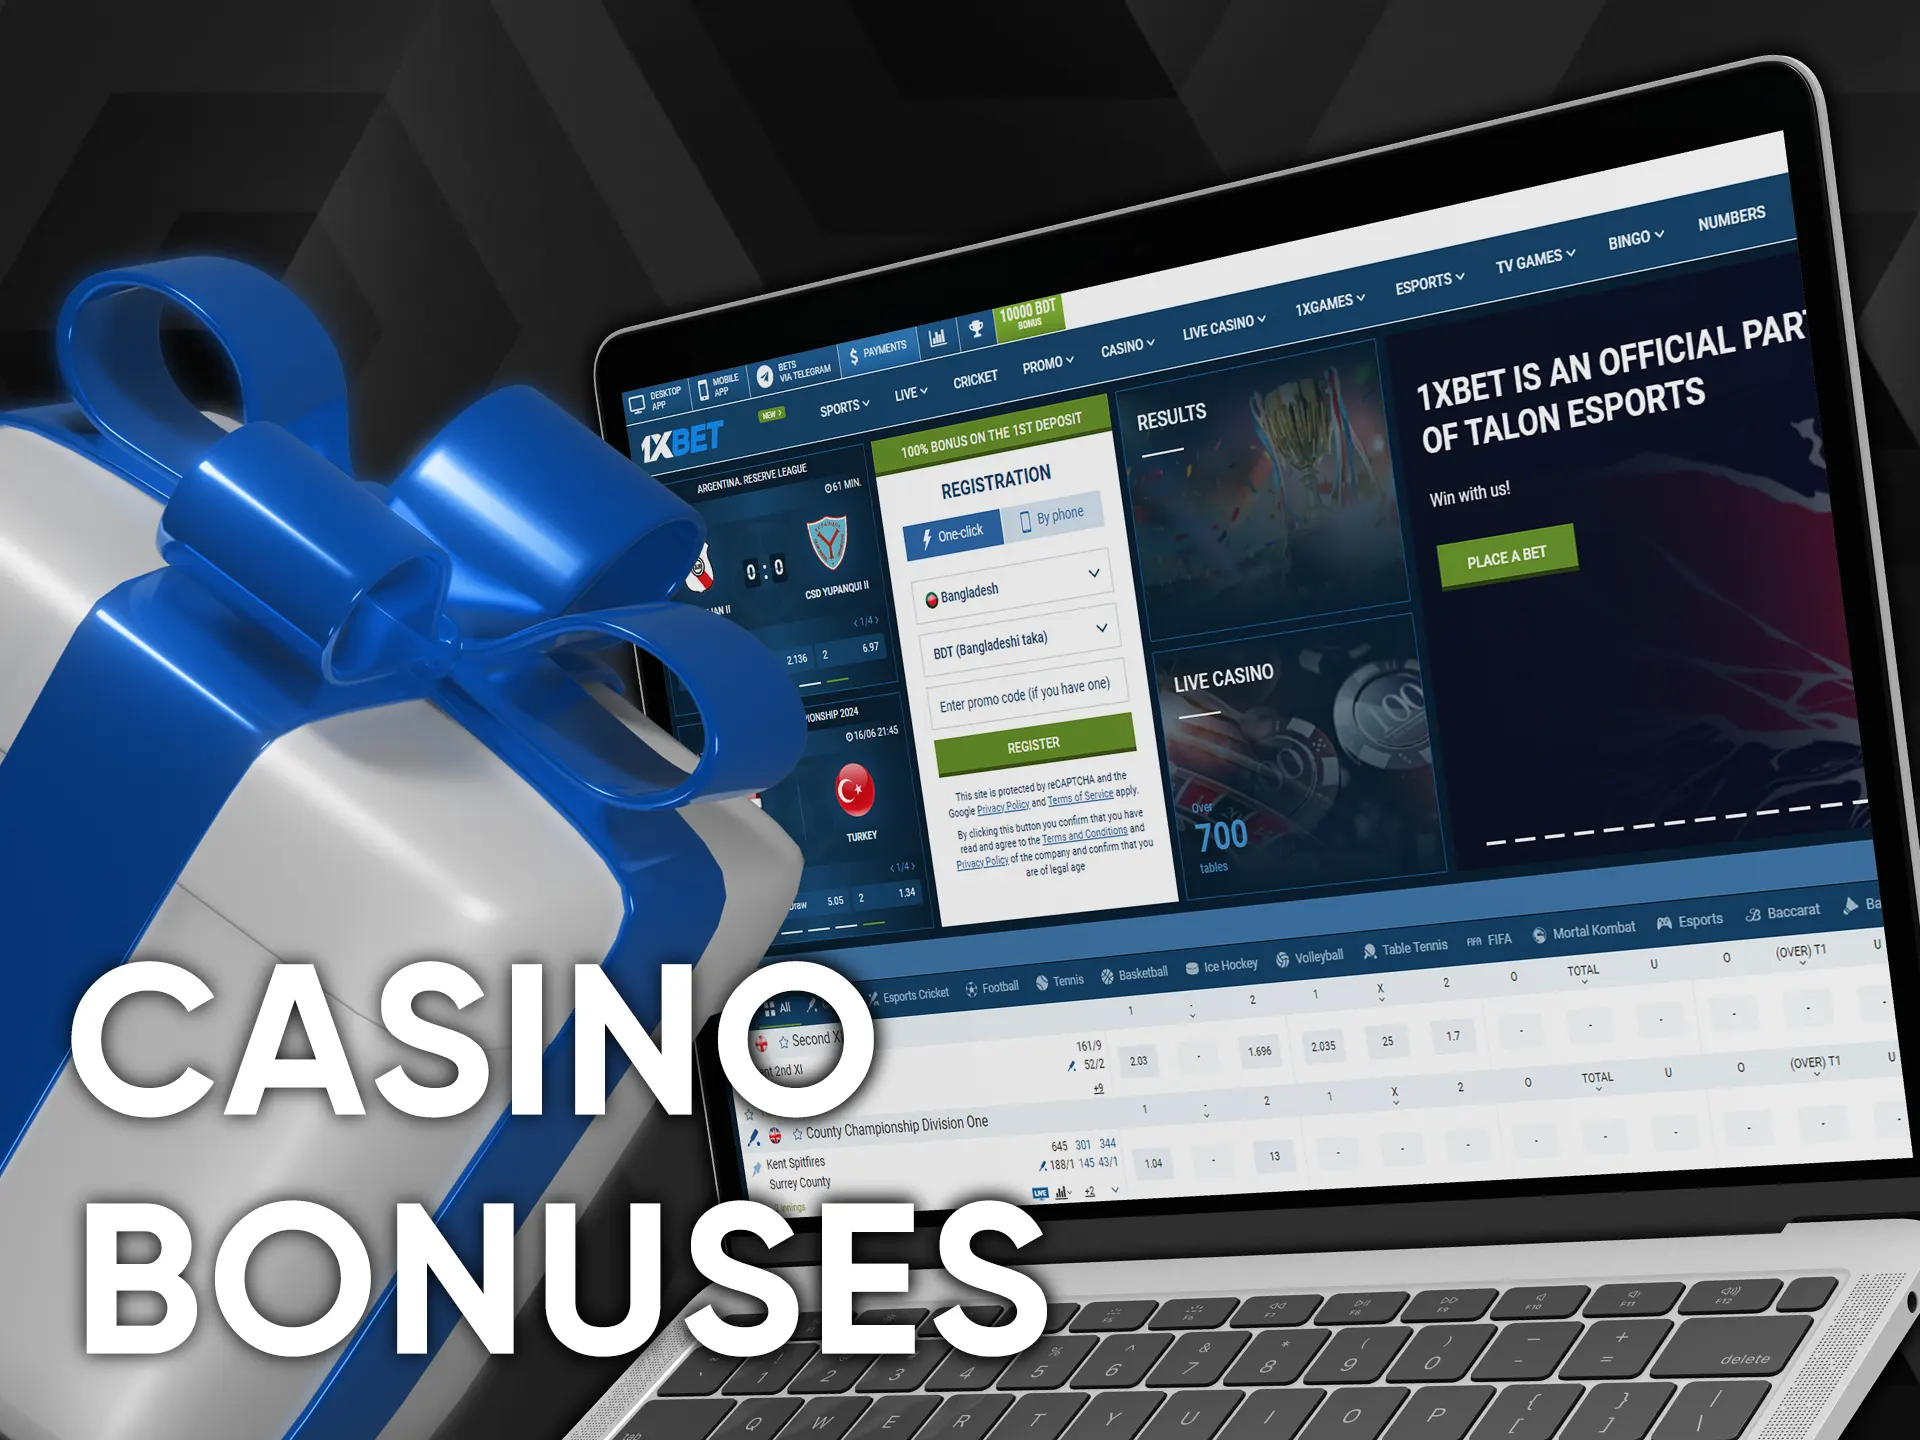 Play casino games on different websites and get bonuses.